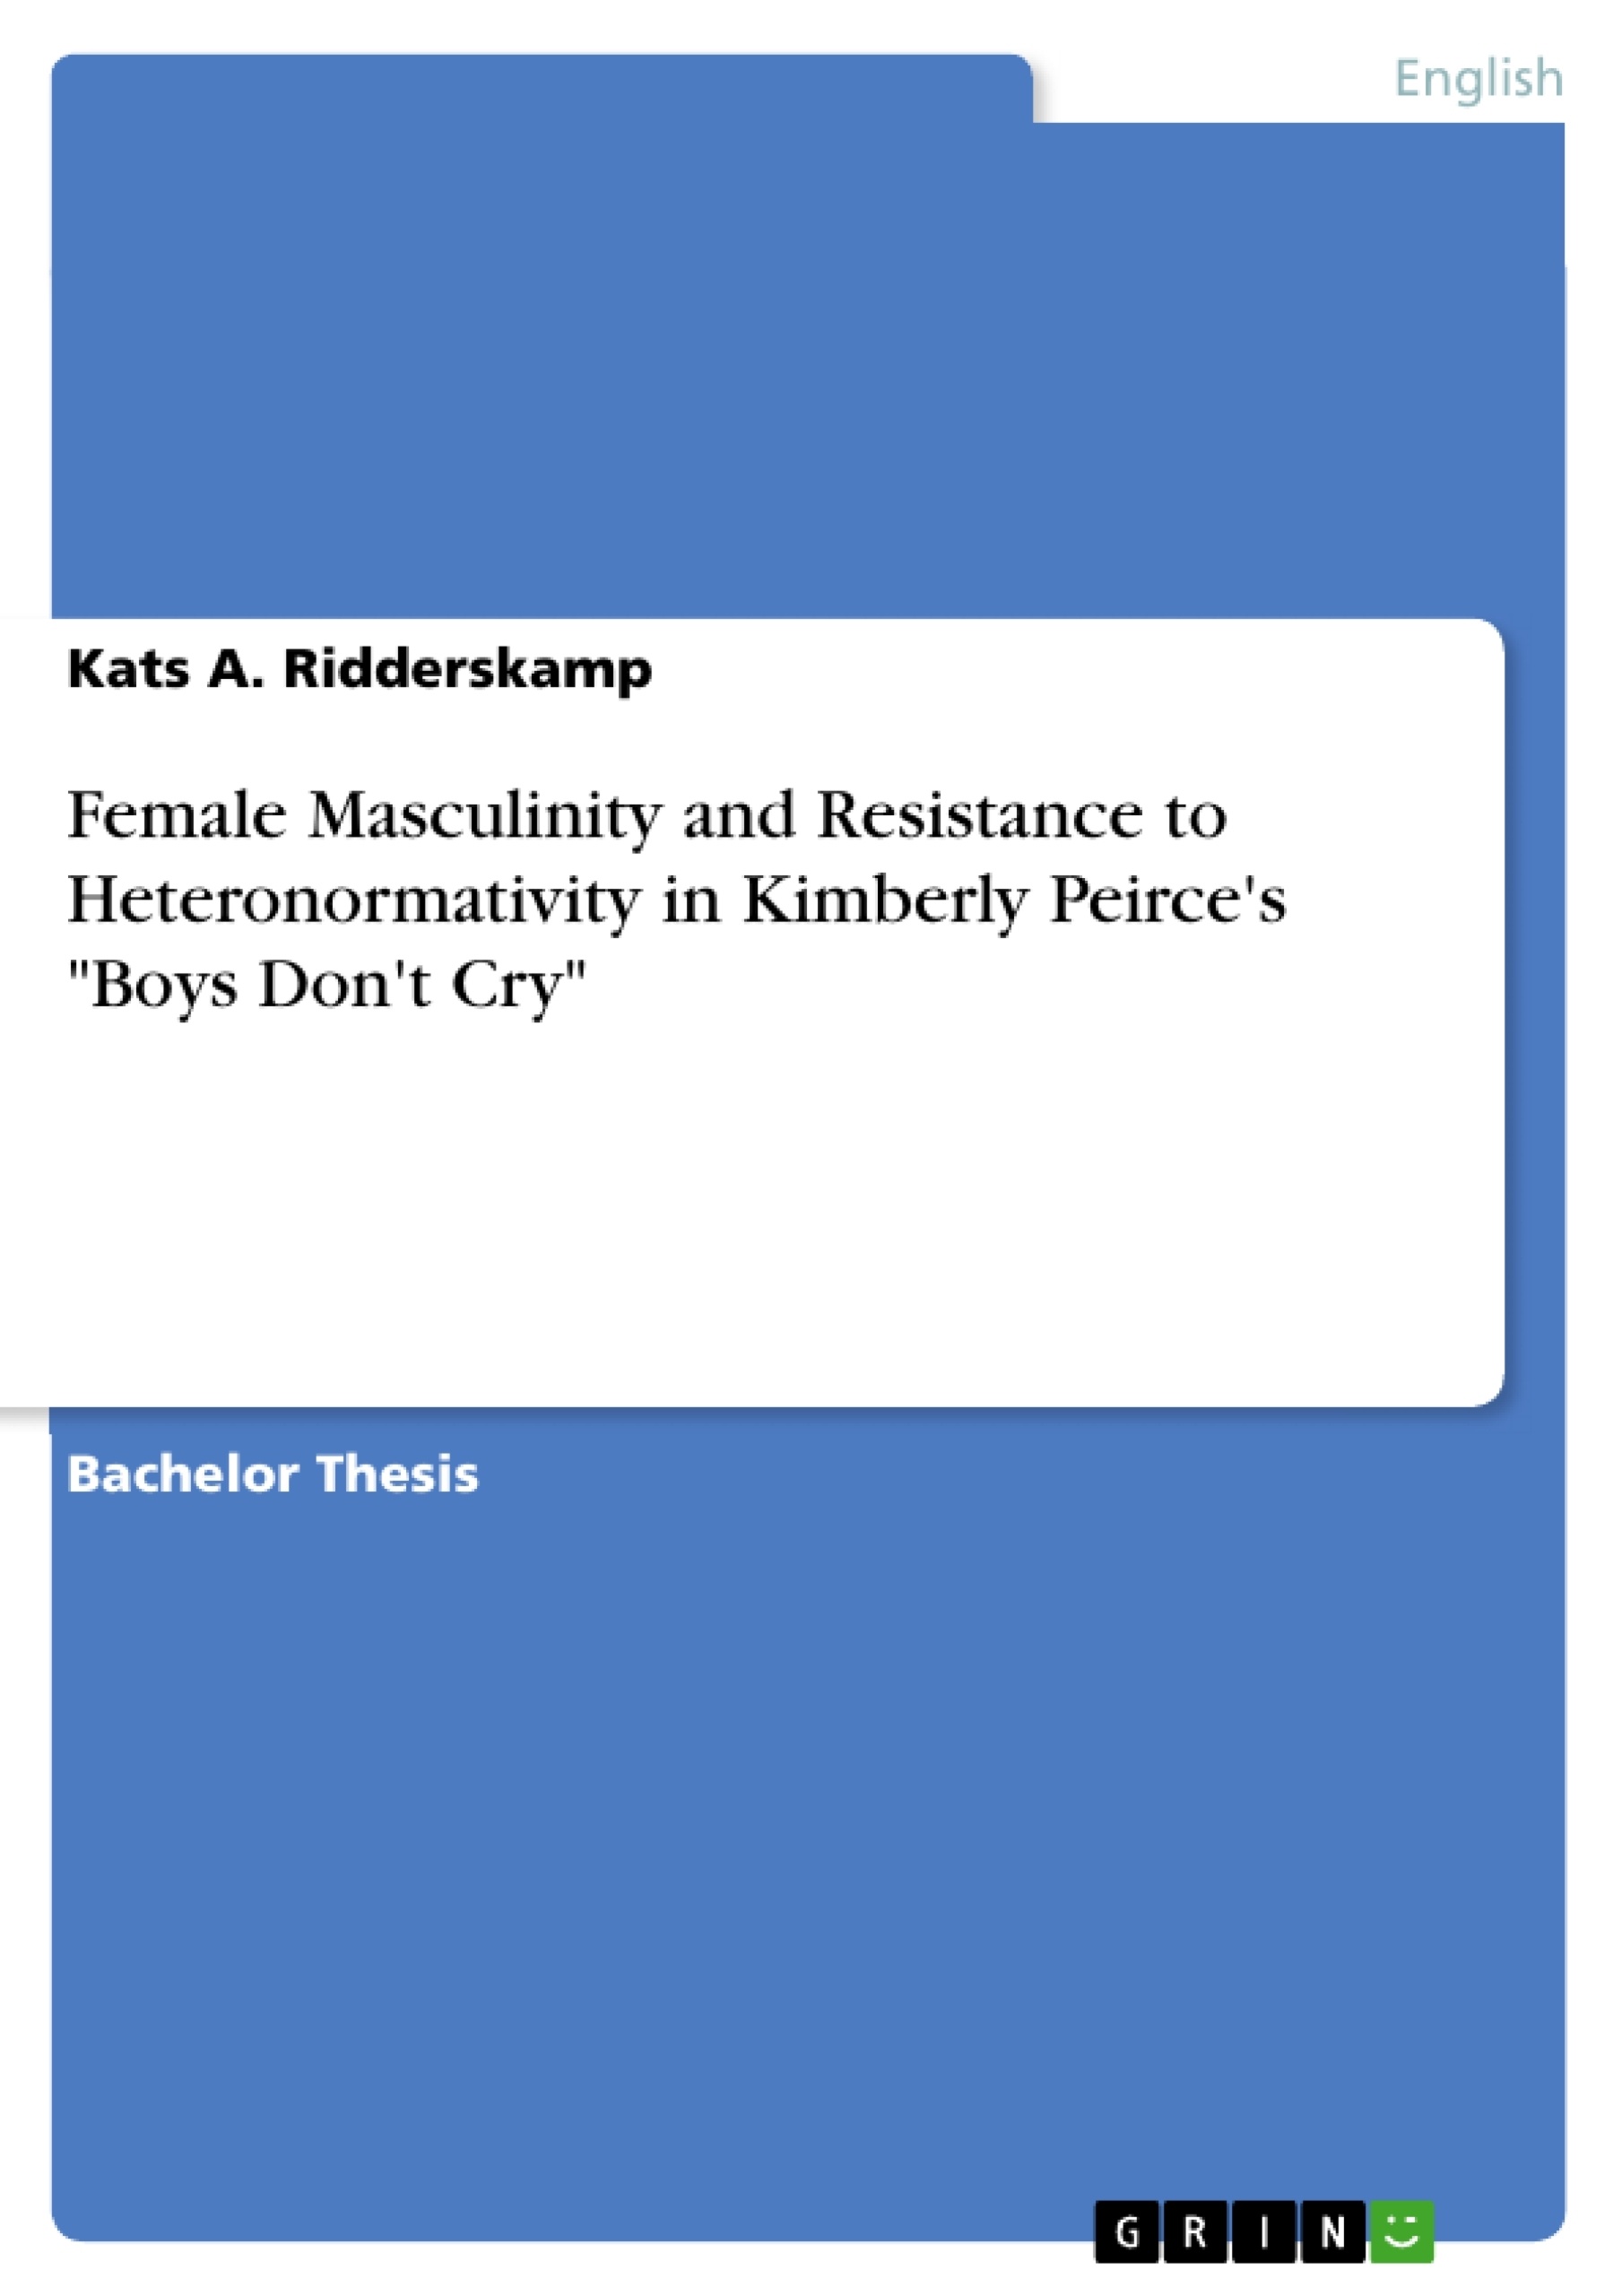 Title: Female Masculinity and Resistance to Heteronormativity in Kimberly Peirce's "Boys Don't Cry"